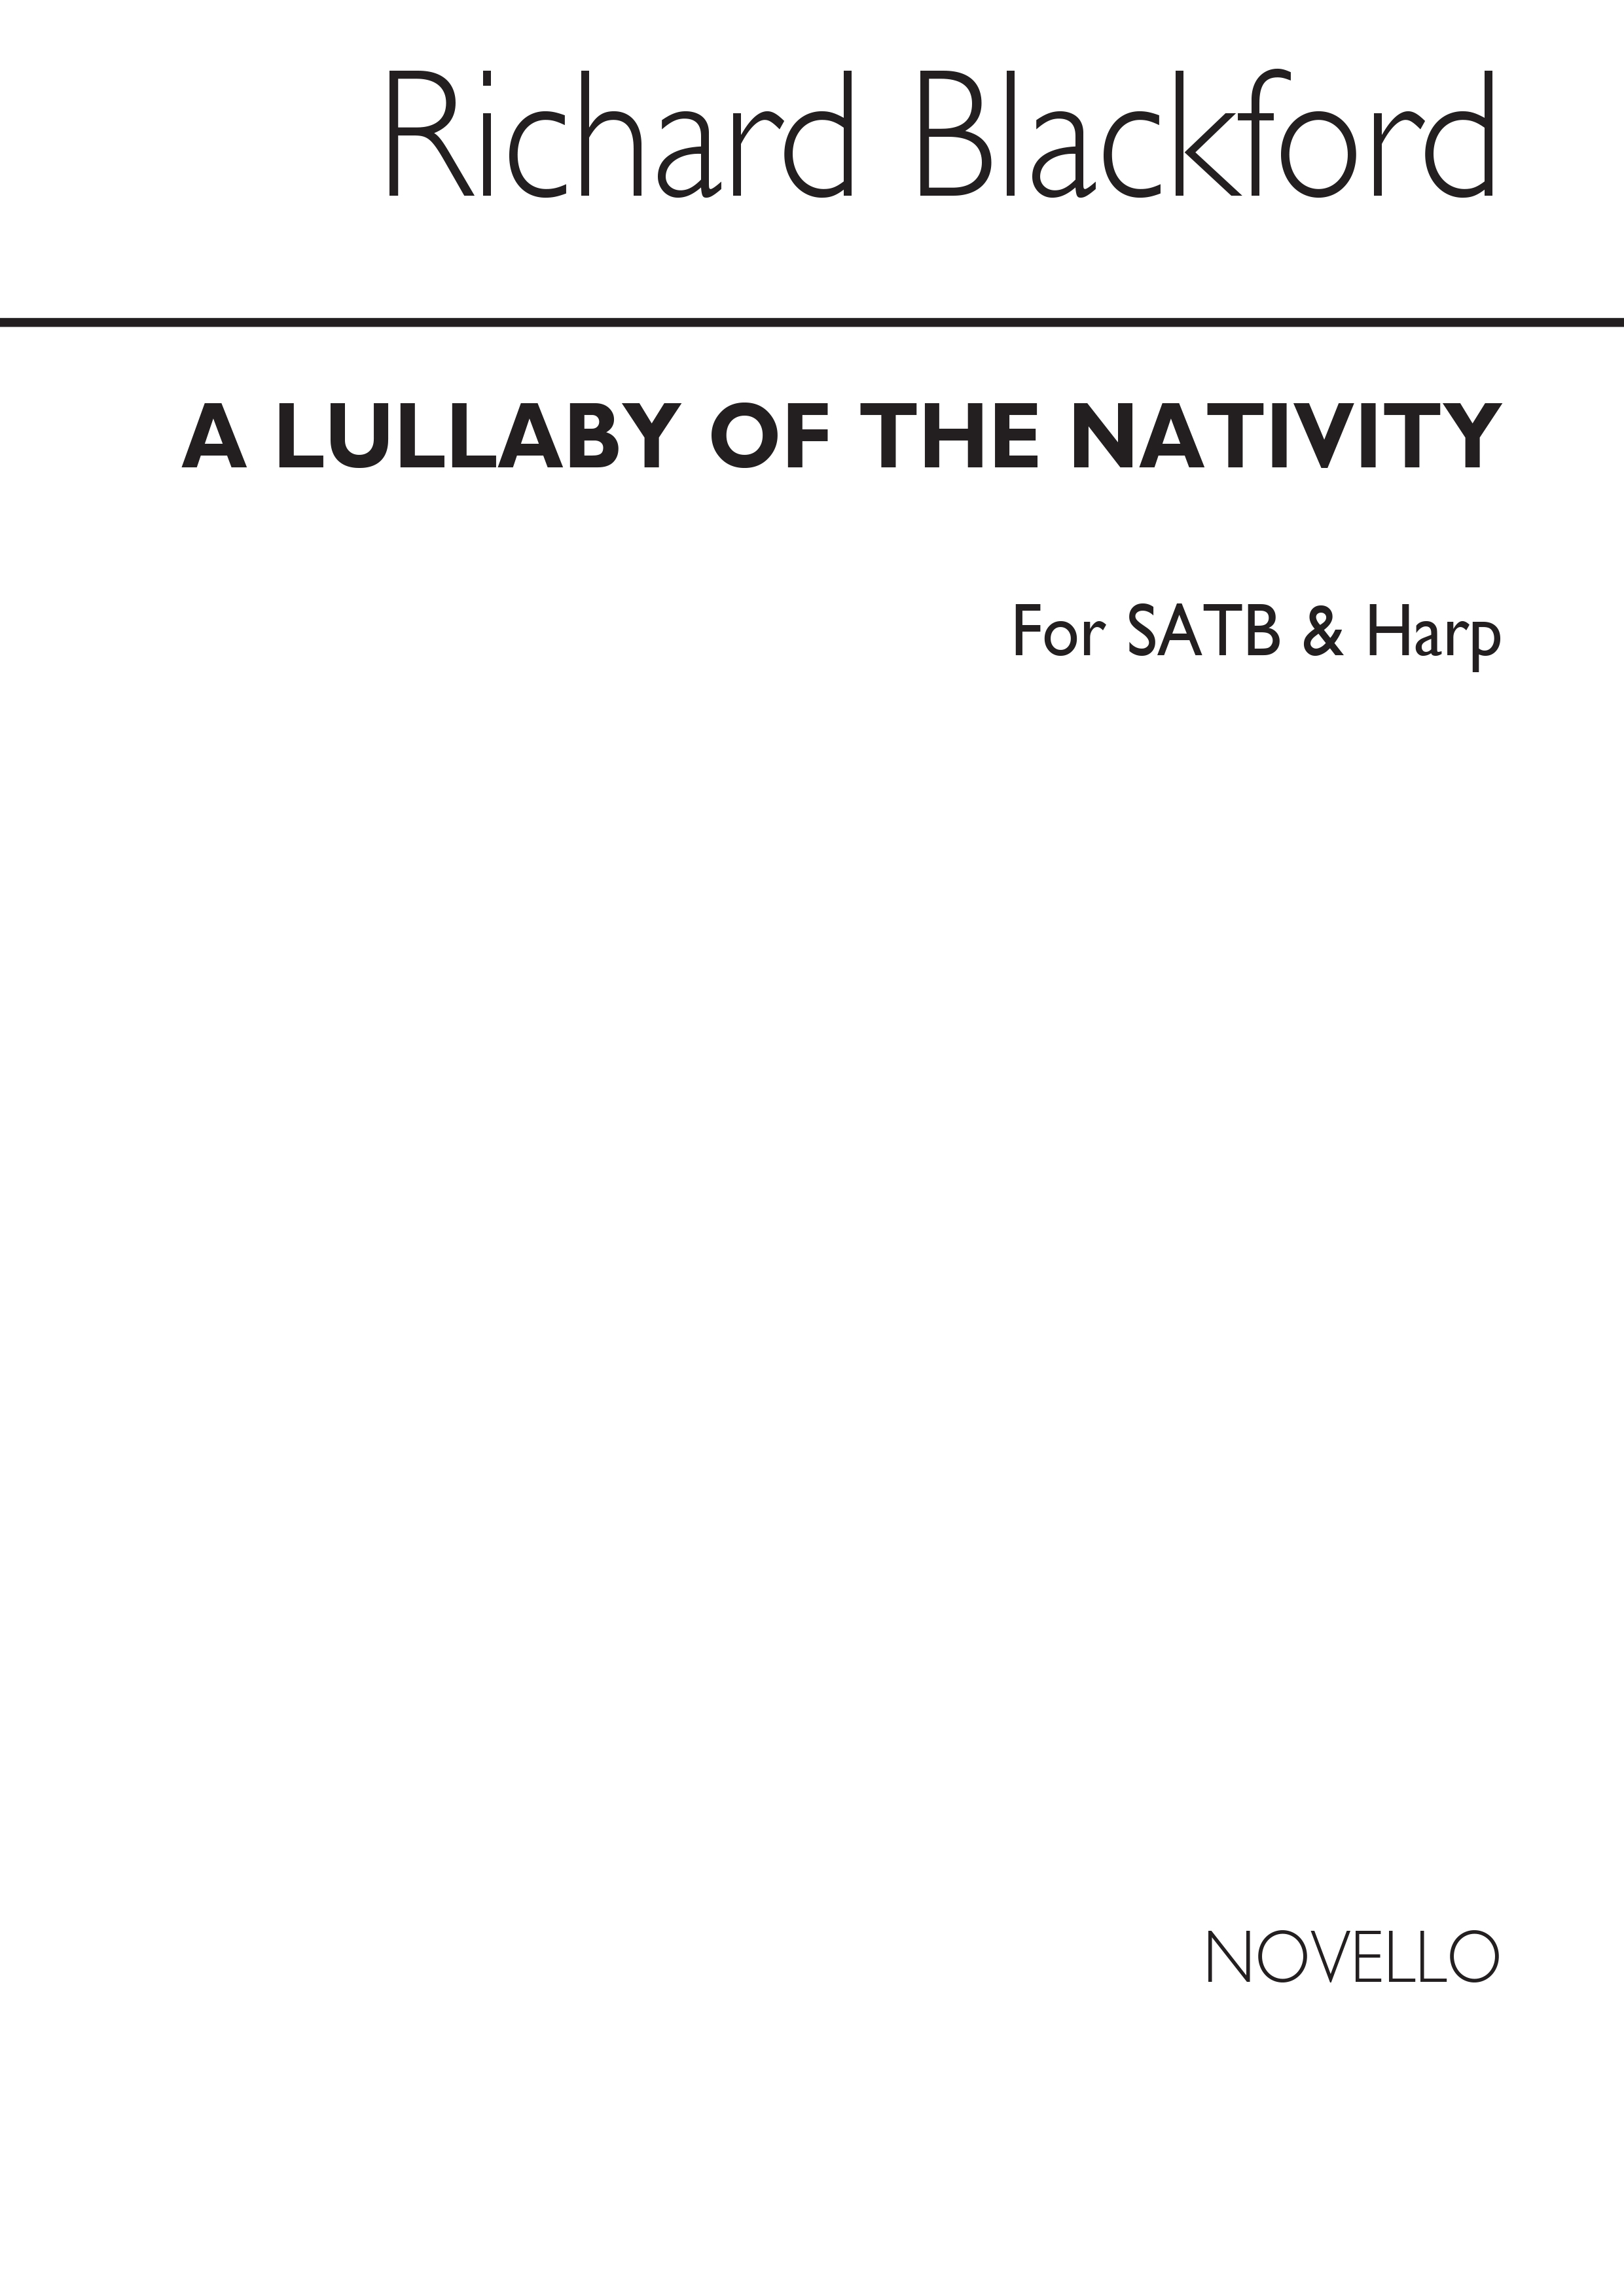 Richard Blackford: A Lullaby of The Nativity: SATB: Vocal Score